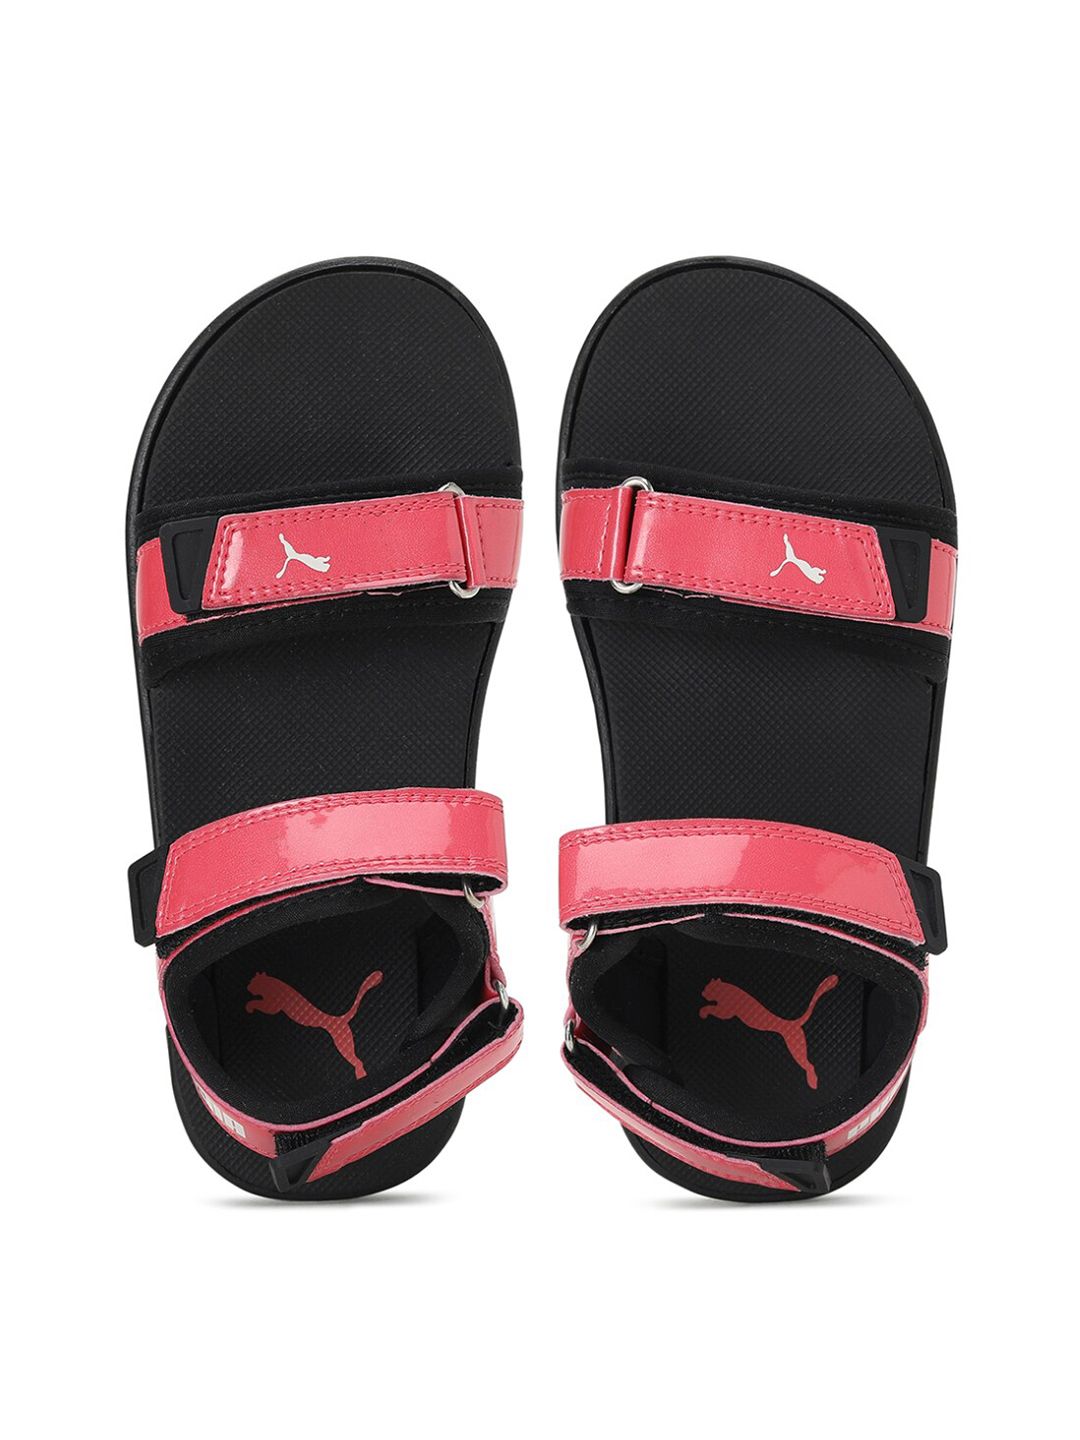 Puma Women Pink and Black Sports Sandals Price in India